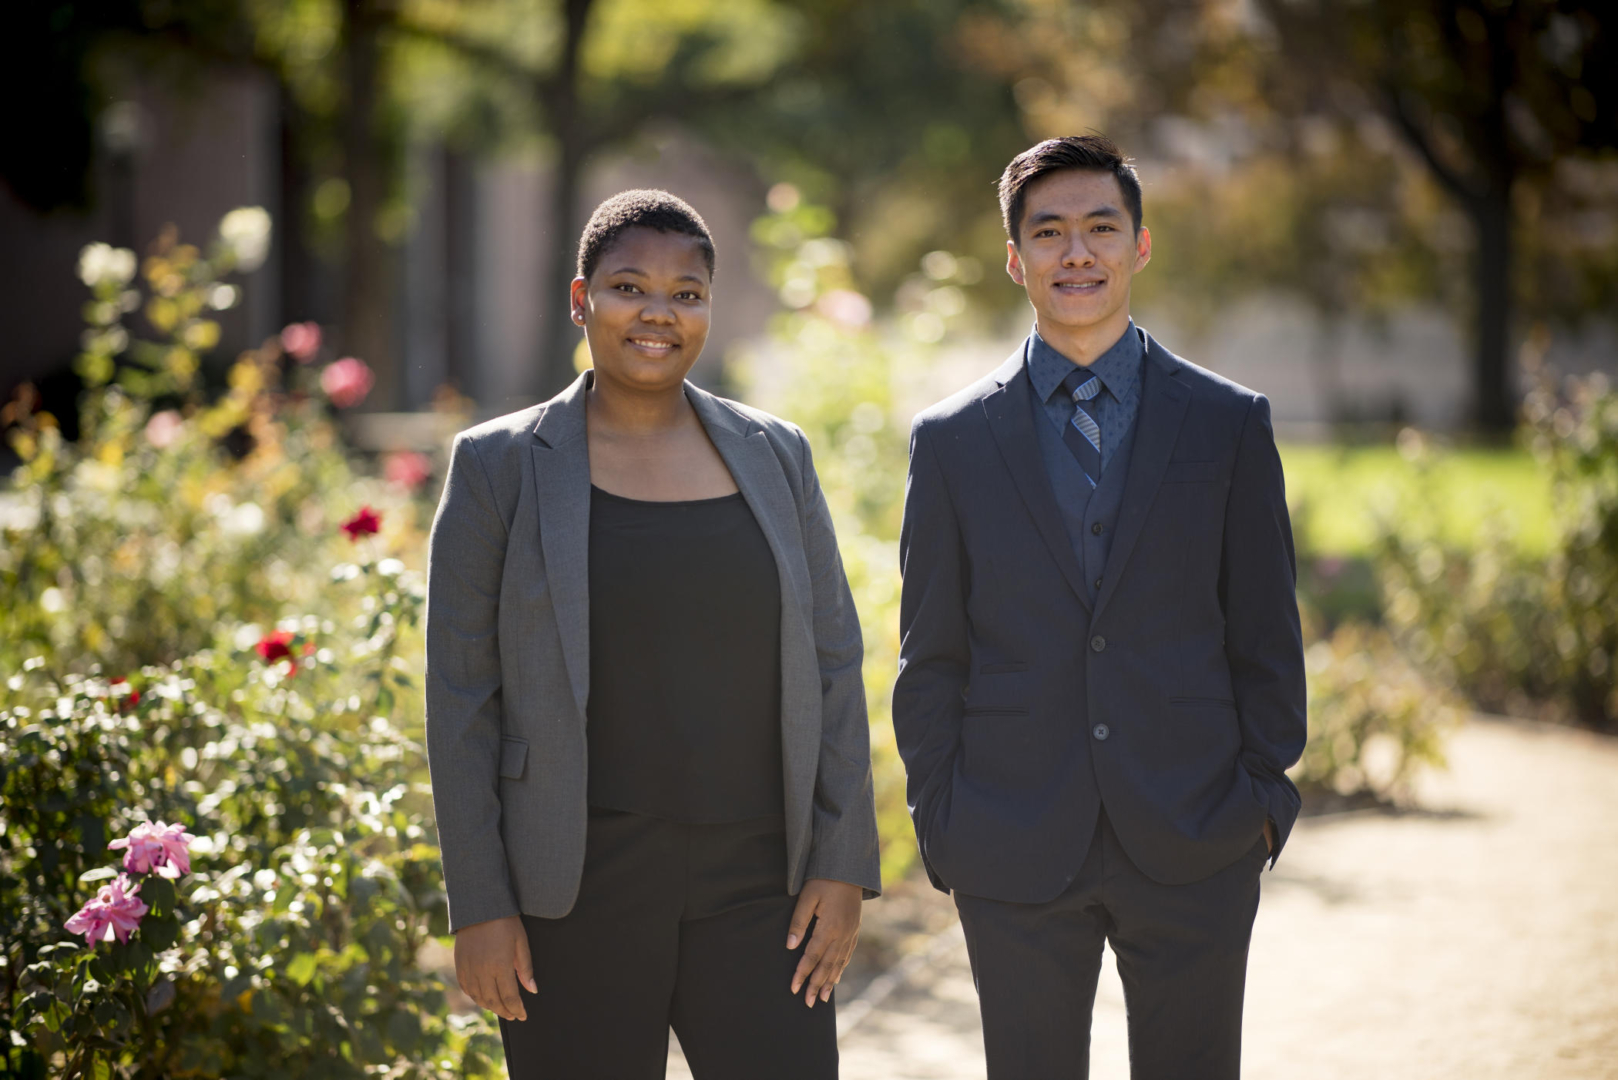 Two students pose in the rose garden wearing blazers, slacks, and other professional clothing.